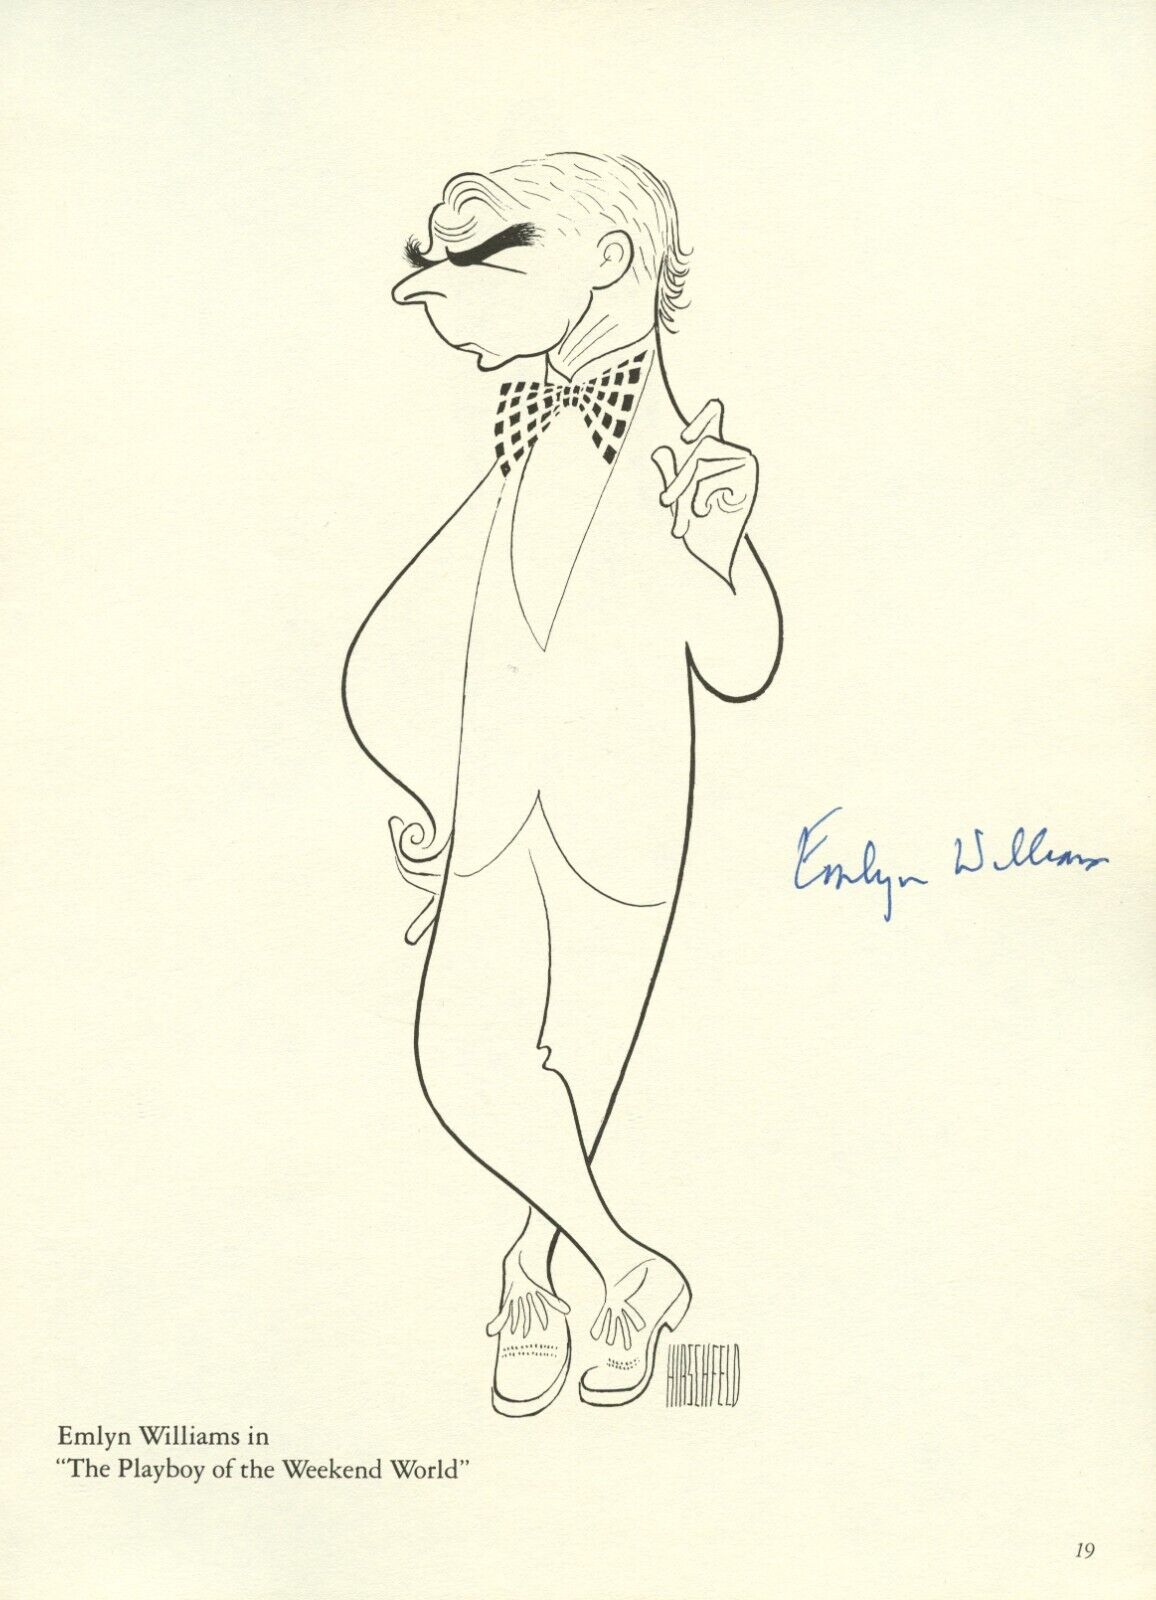 Emlyn Williams d1987 signed autograph 8x11 Page from Al HIRSCHFELD Sketch Book